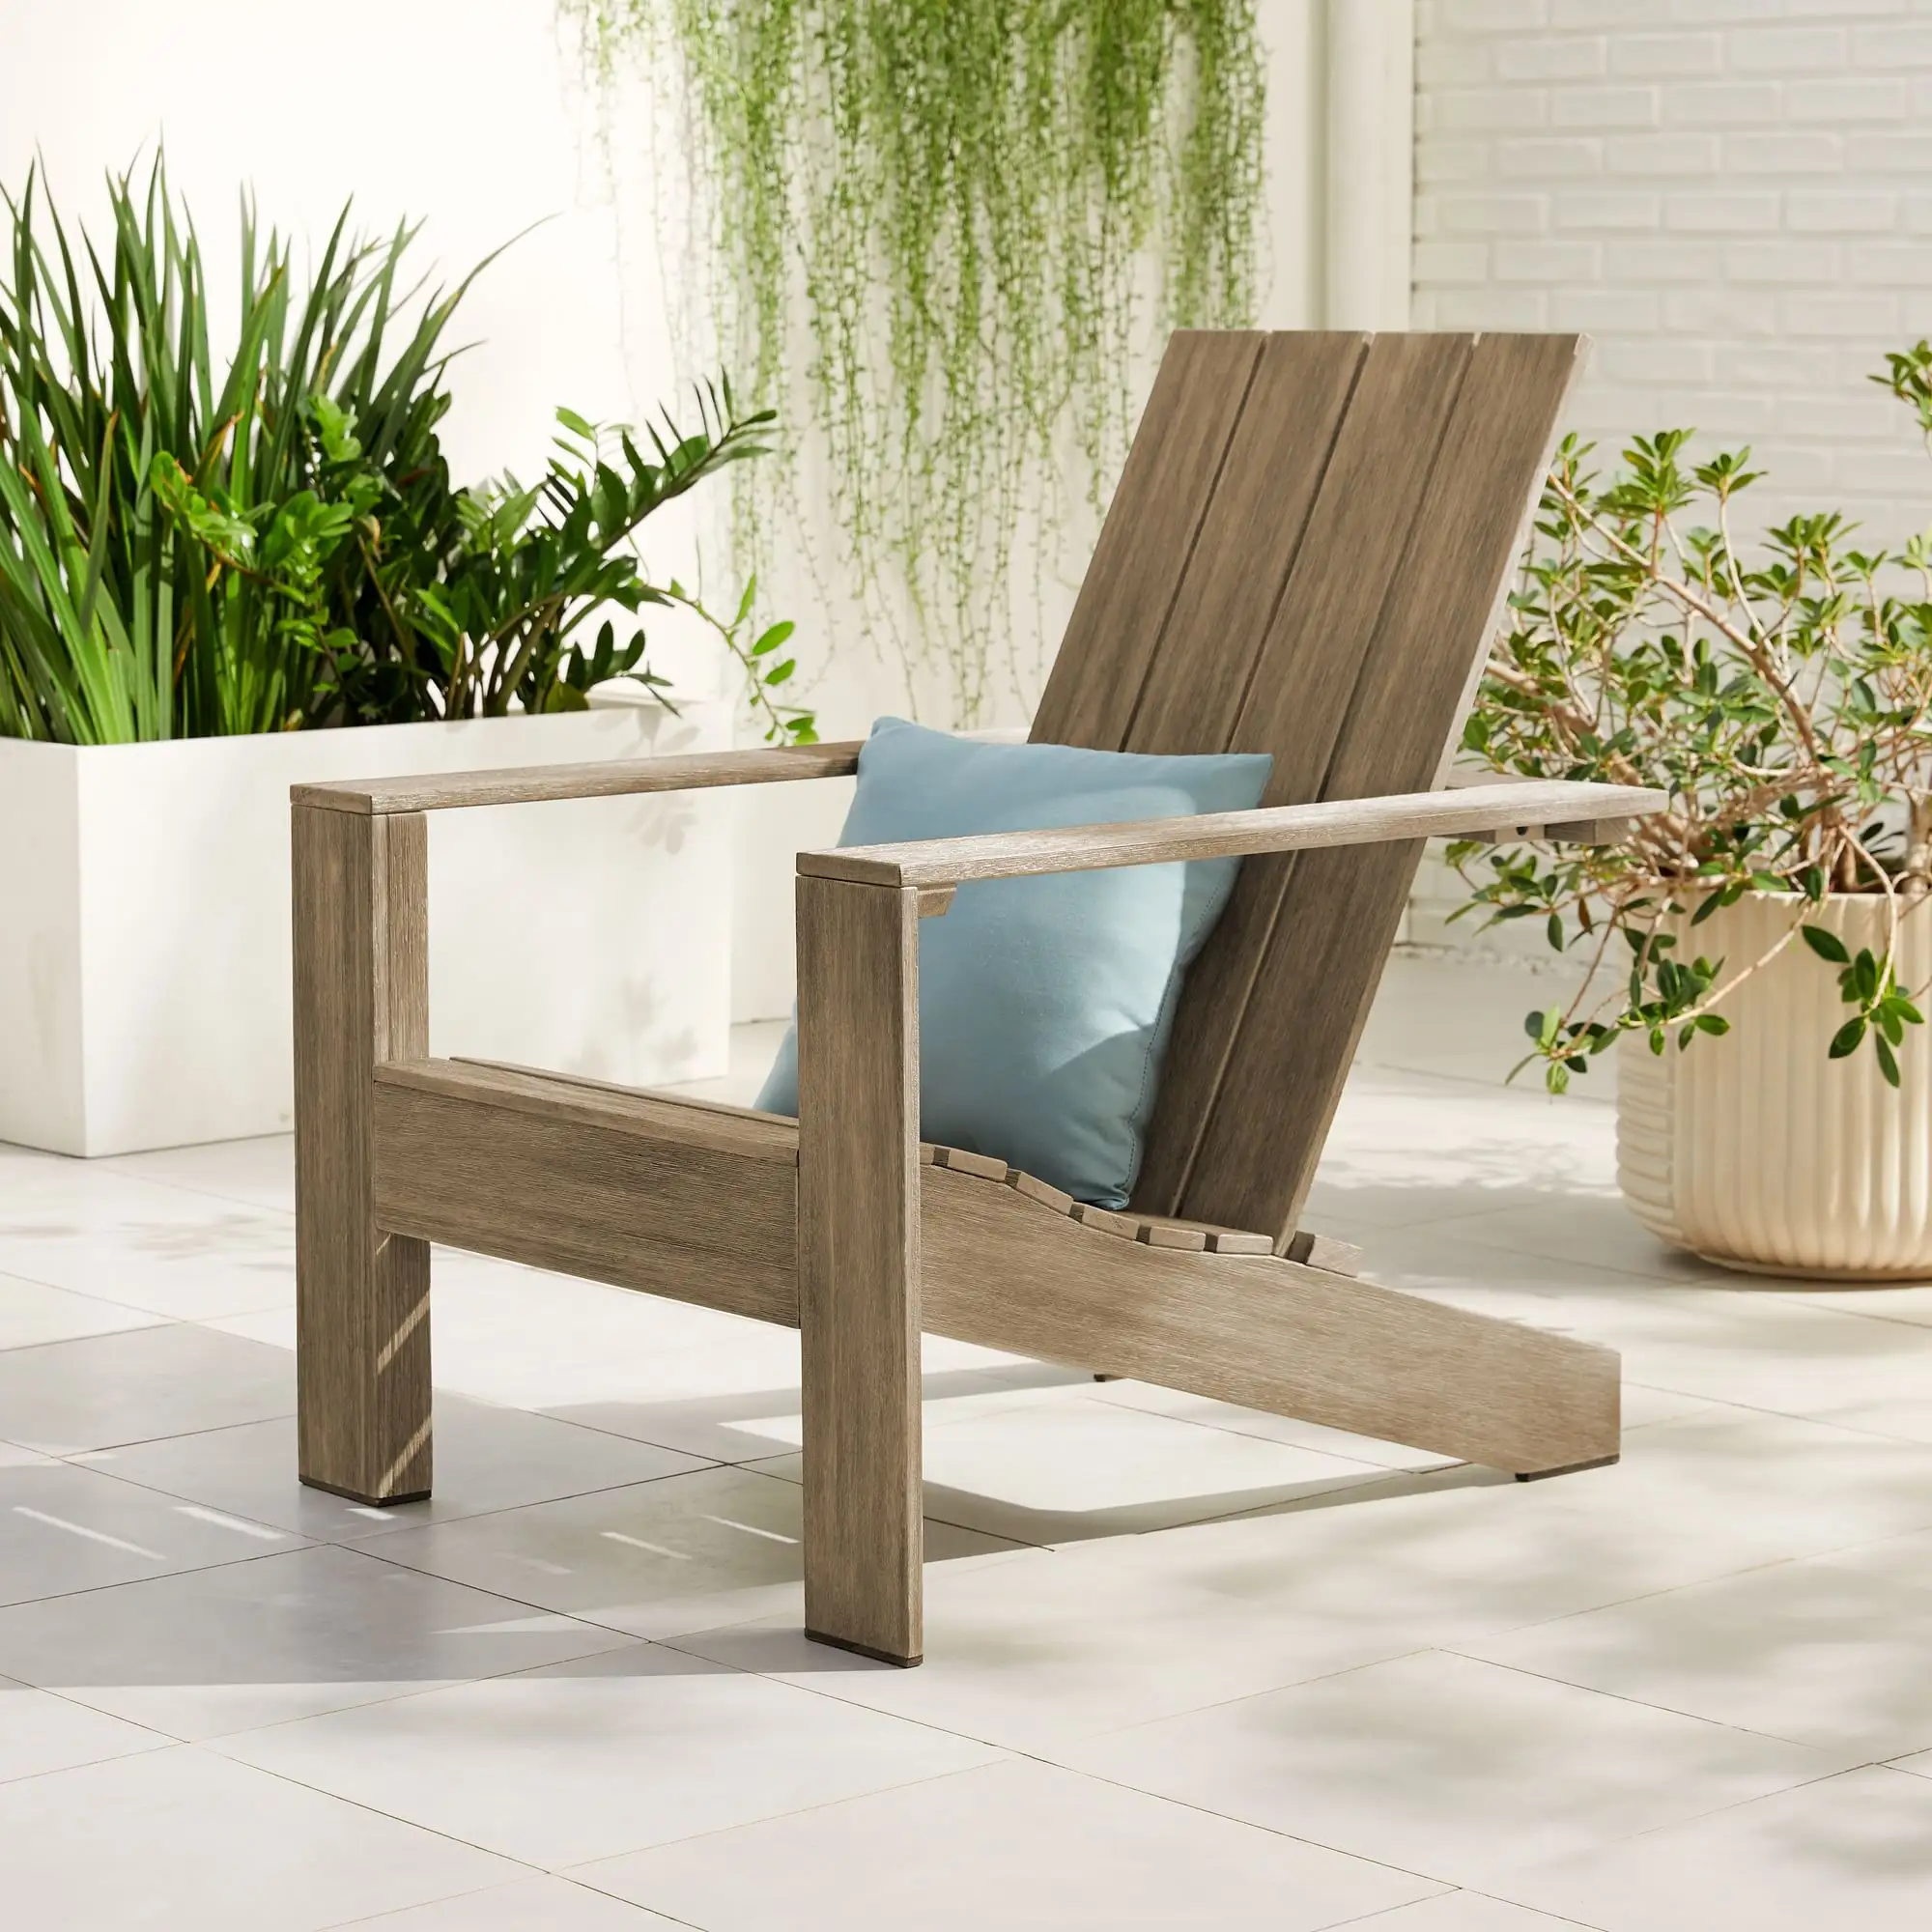 New Arrival and Full of Sense of Design Teak Wooden Outdoor Furniture Garden Chair for Garden and Yard Teak Wooden Chair